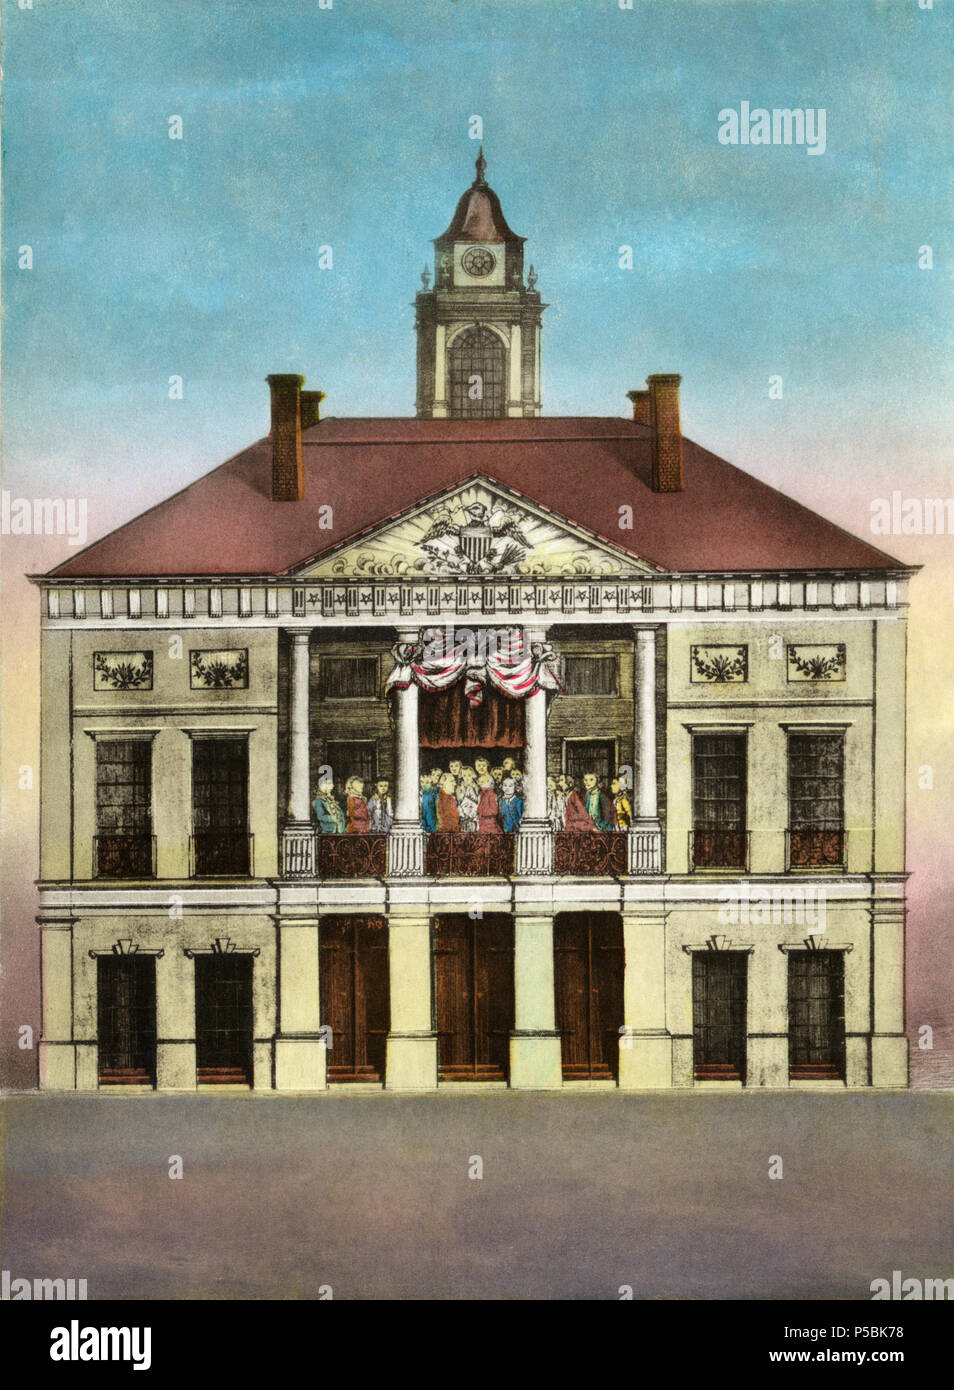 N/A. English: Federal Hall, N.Y. 1789 - First Capitol of the United States. 1 print mounted on paper : engraving, hand-colored ; 20 x 14.7 cm. 1790.   Amos Doolittle  (1754–1832)     Description American engraver and caricaturist  Date of birth/death 18 May 1754 30 January 1832  Location of birth/death Cheshire New Haven  Work location New Haven  Authority control  : Q4747853 VIAF: 62646617 ISNI: 0000 0000 6688 3177 ULAN: 500027501 LCCN: n50026725 GND: 130119199 WorldCat 551 Federal Hall, N.Y. 1789 ppmsca.15703 Stock Photo